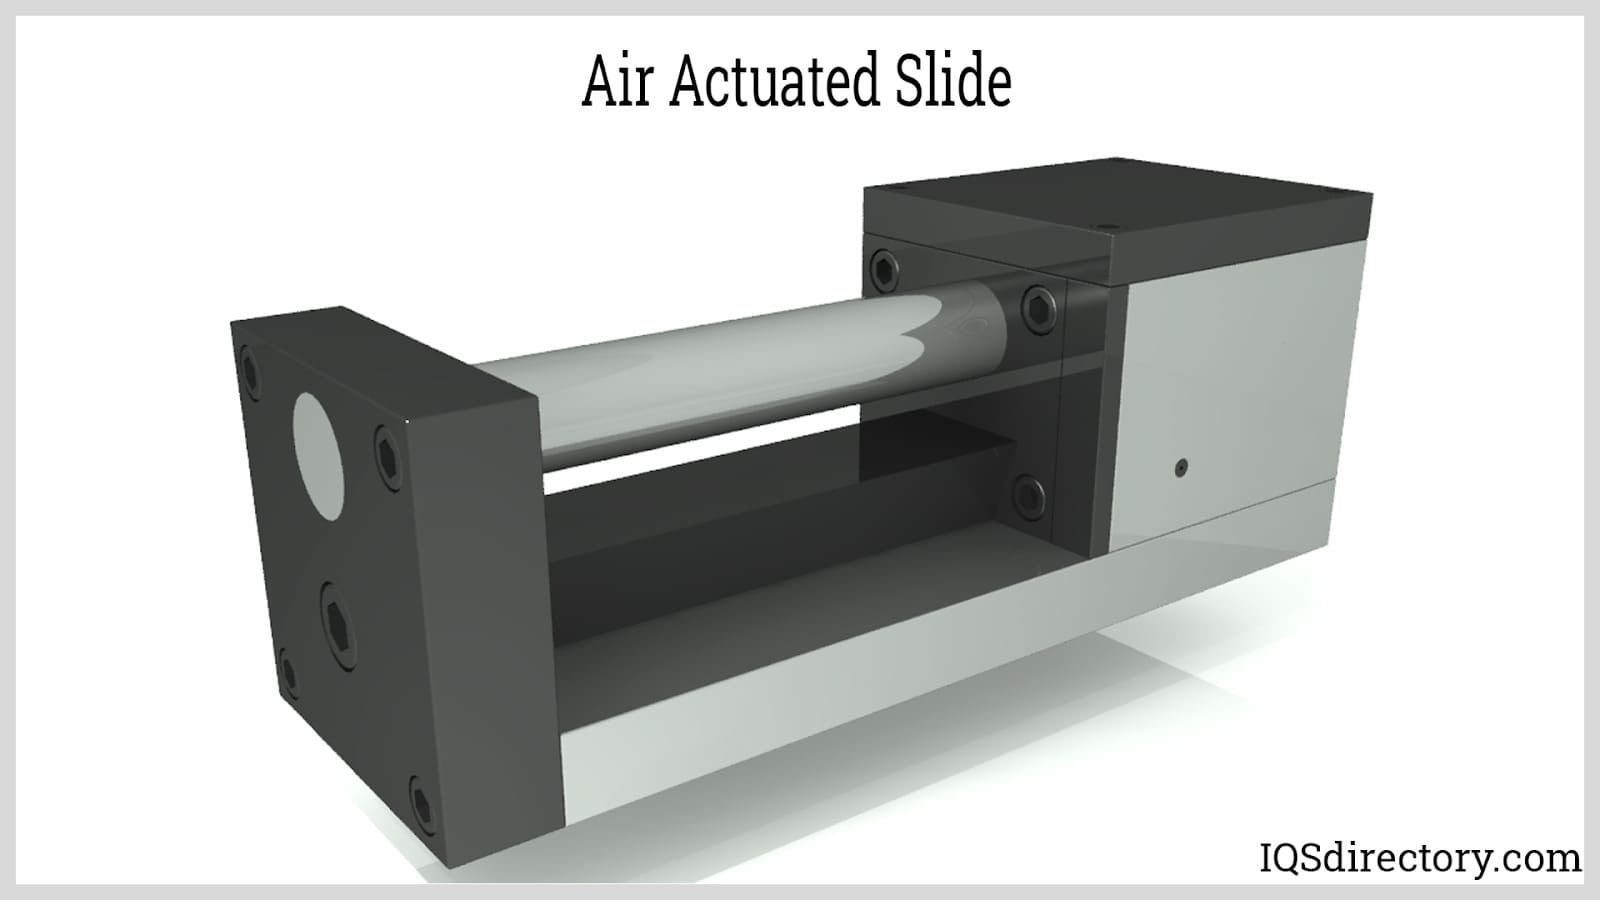 Air Actuated Slide